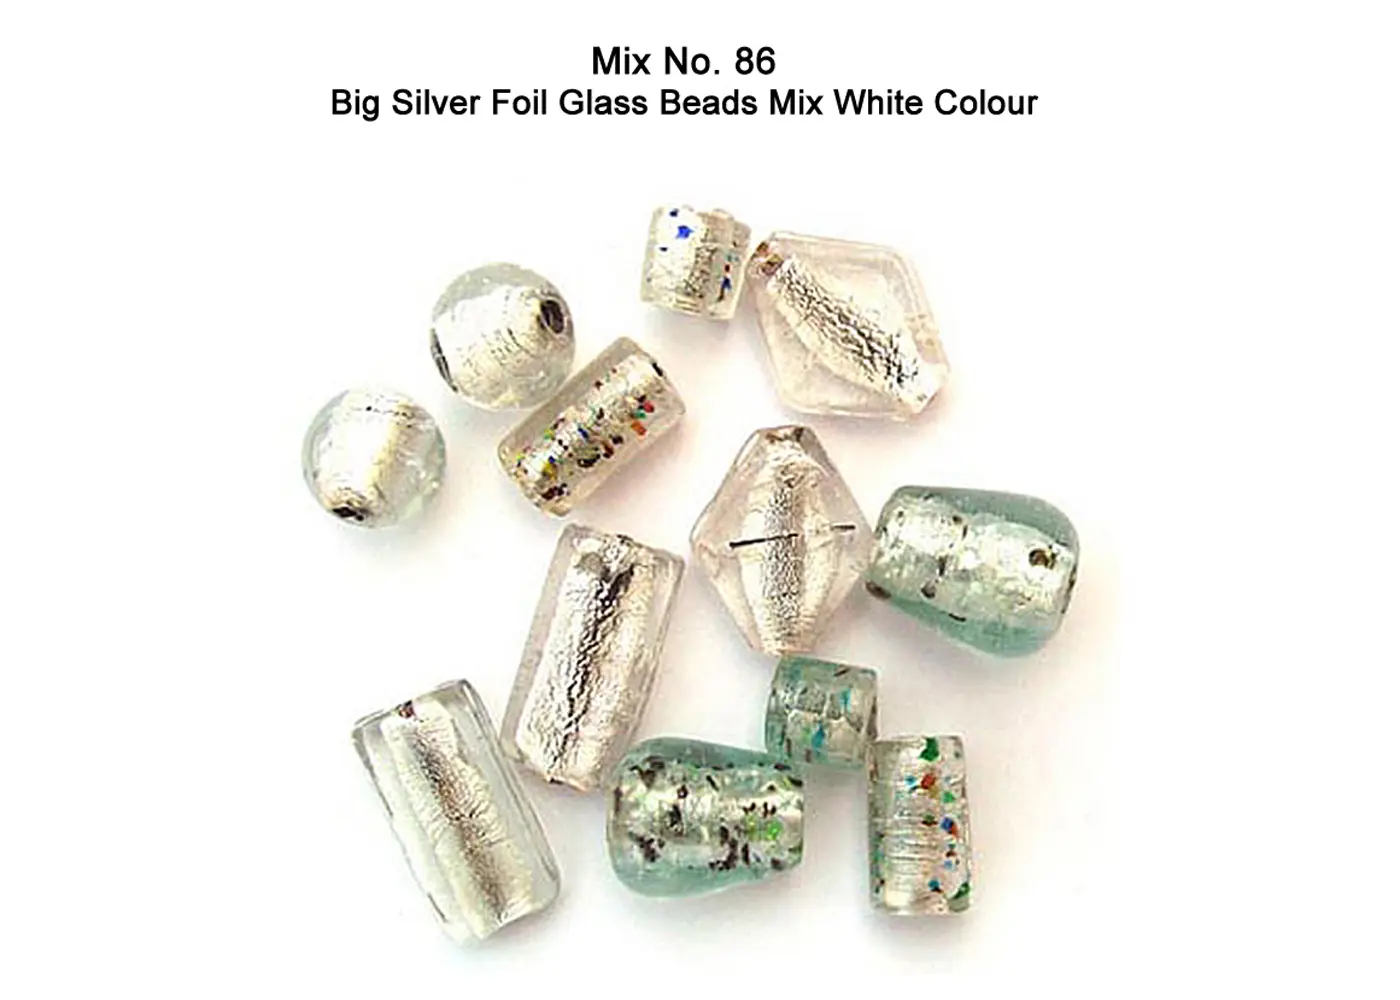 Big silver foil beads in White color